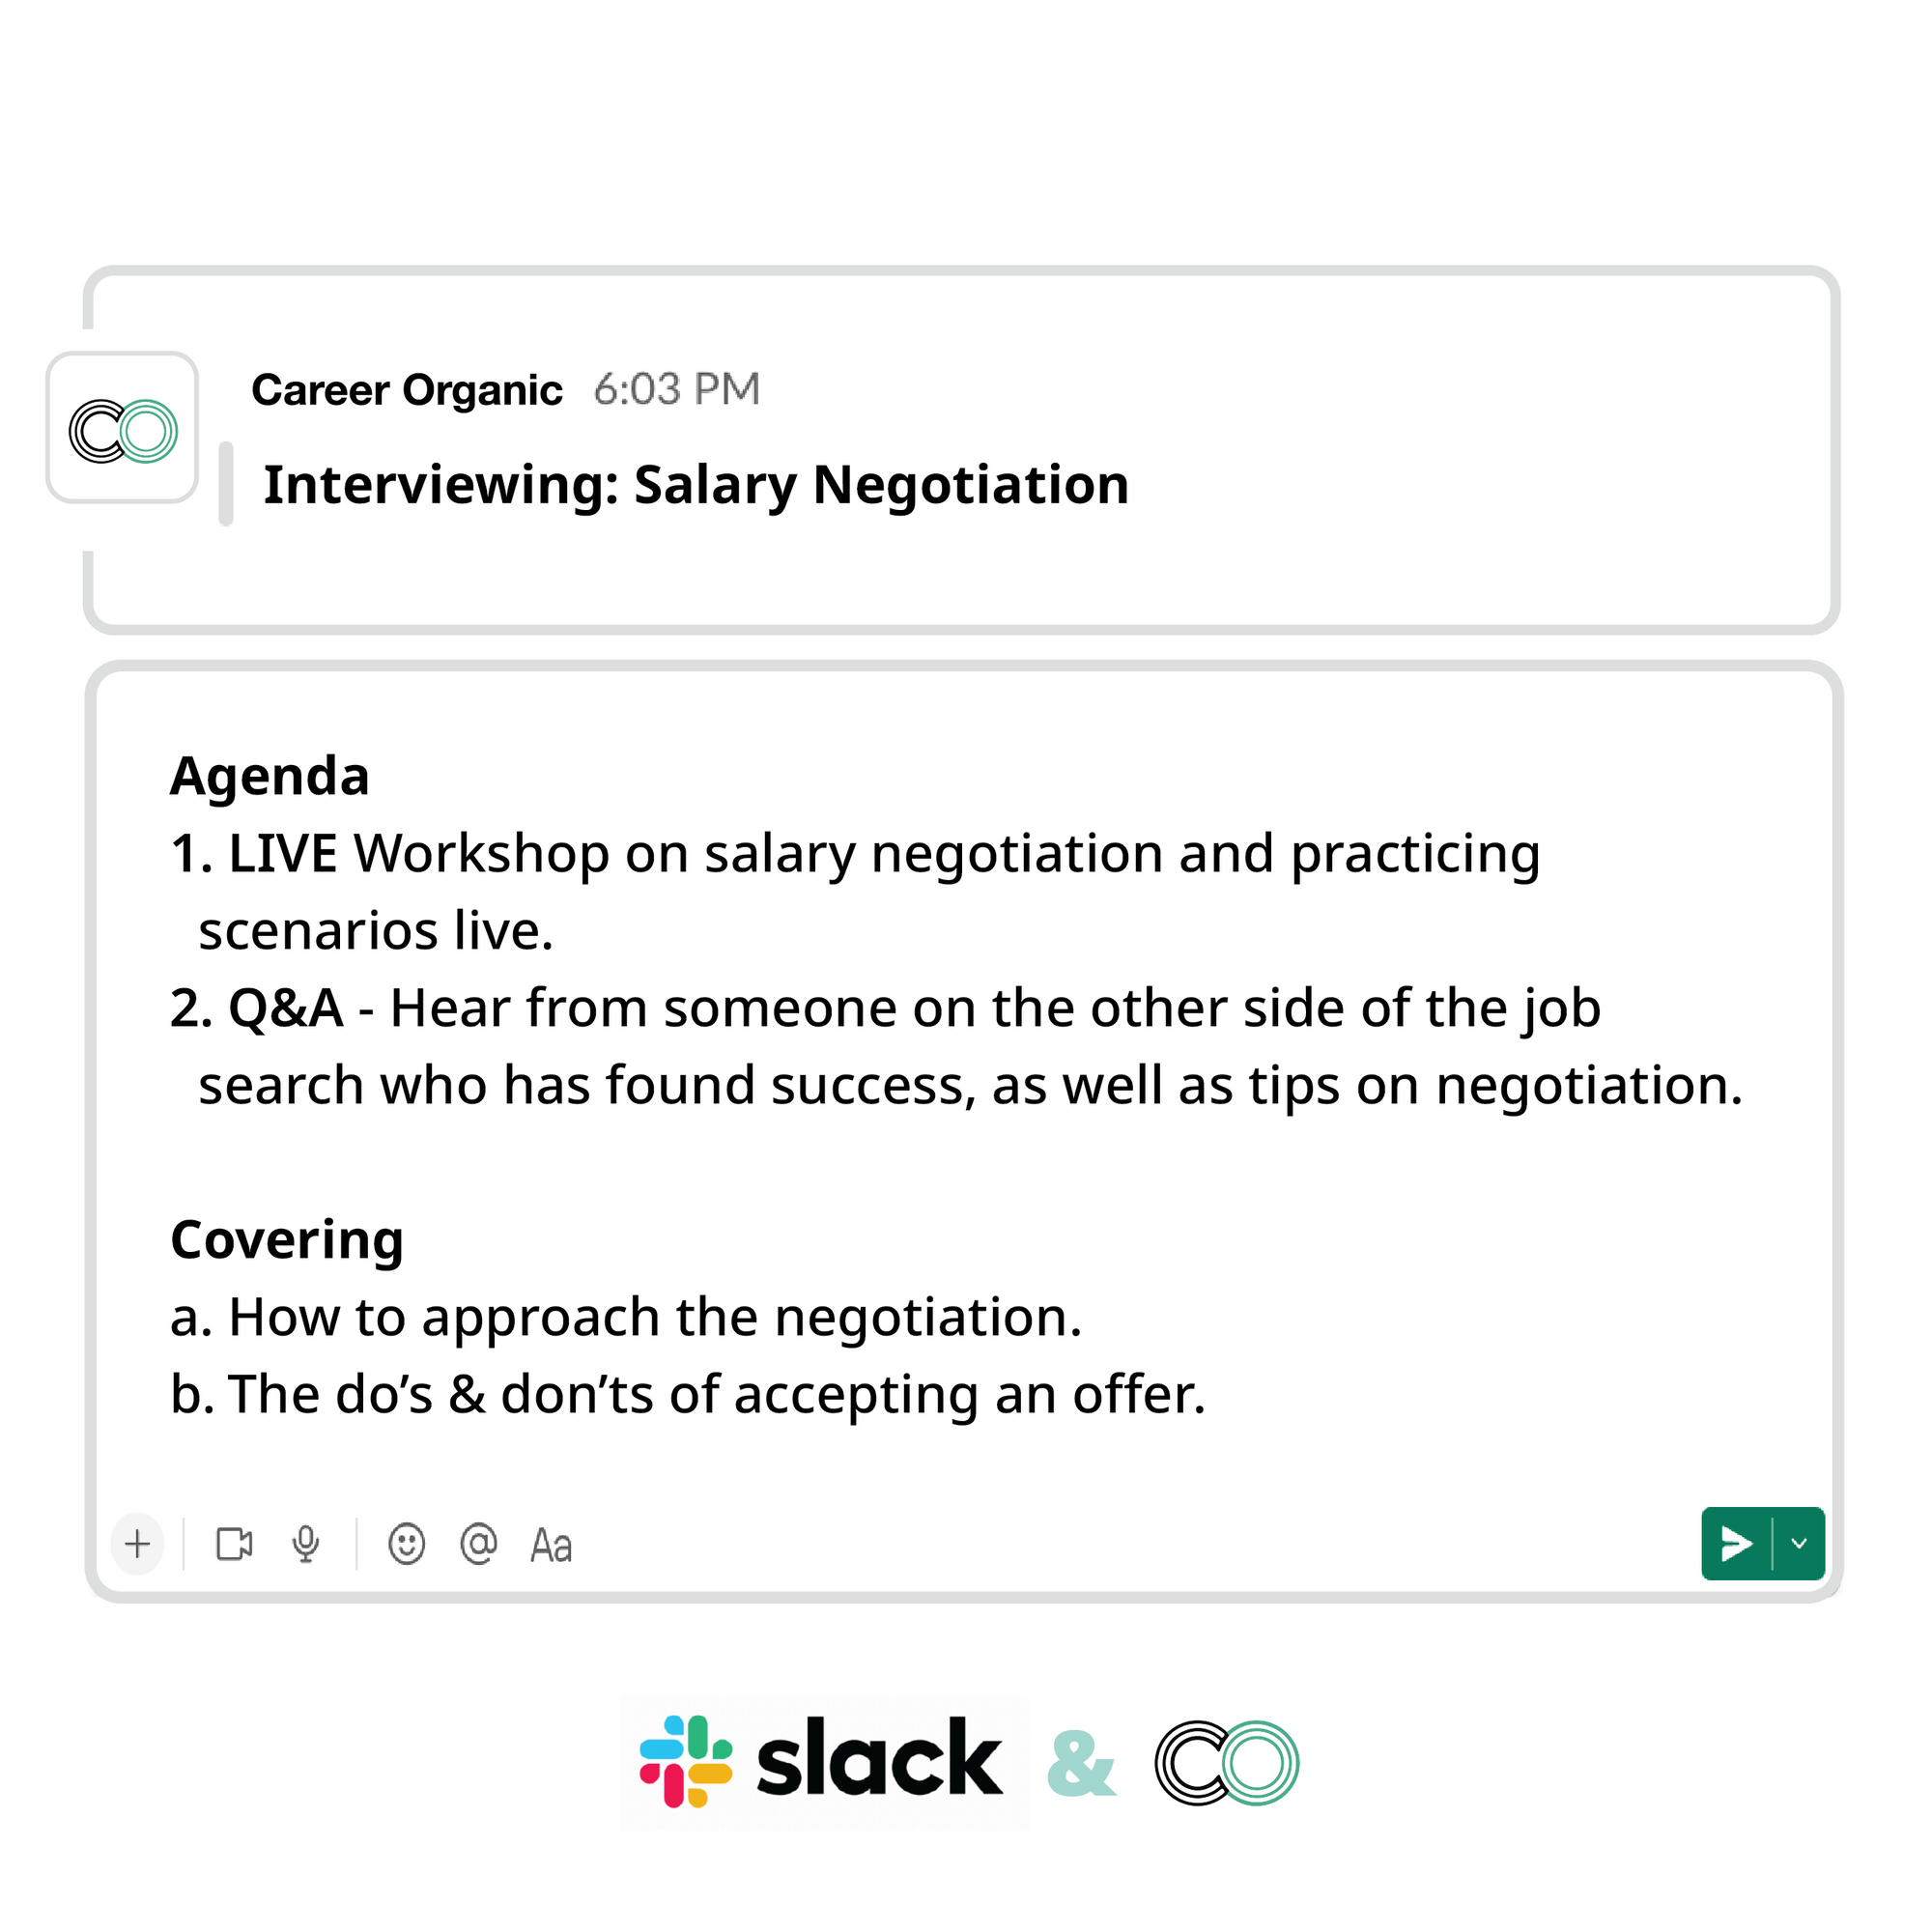 Slack messages displaying a course agenda for interview & salary negotiating group coaching community 